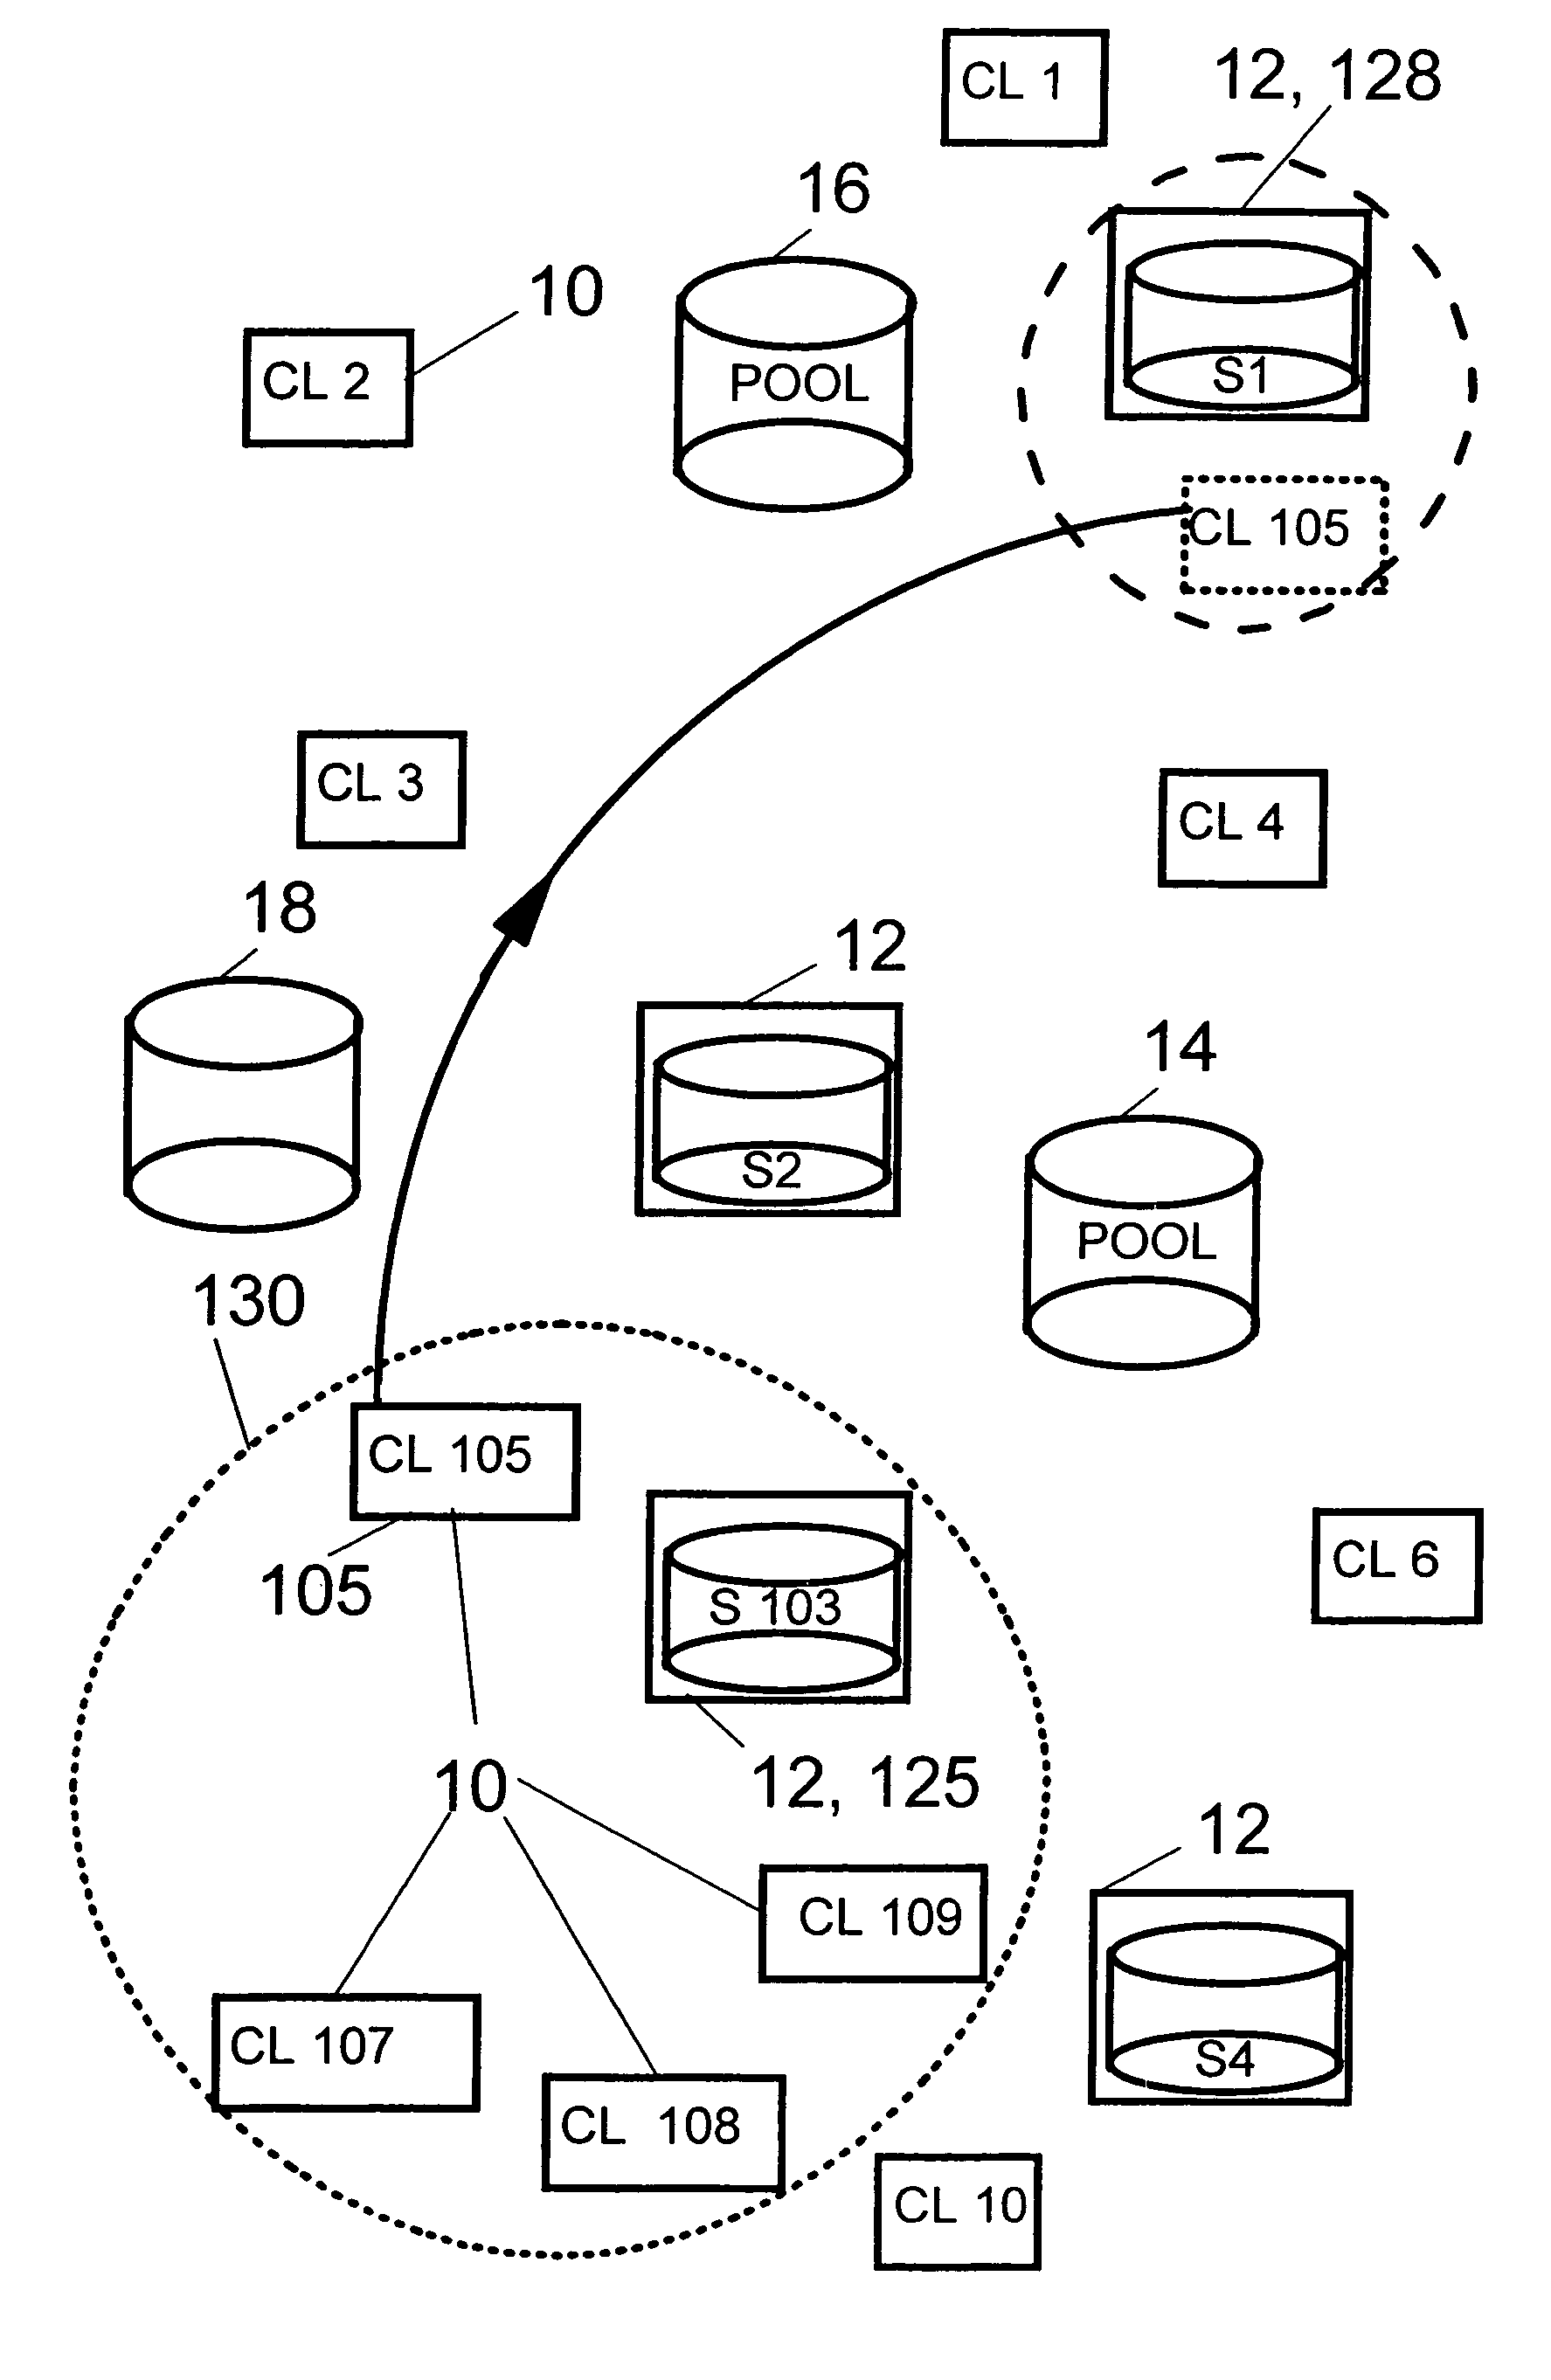 Location independent backup of data from mobile and stationary computers in wide regions regarding network and server activities